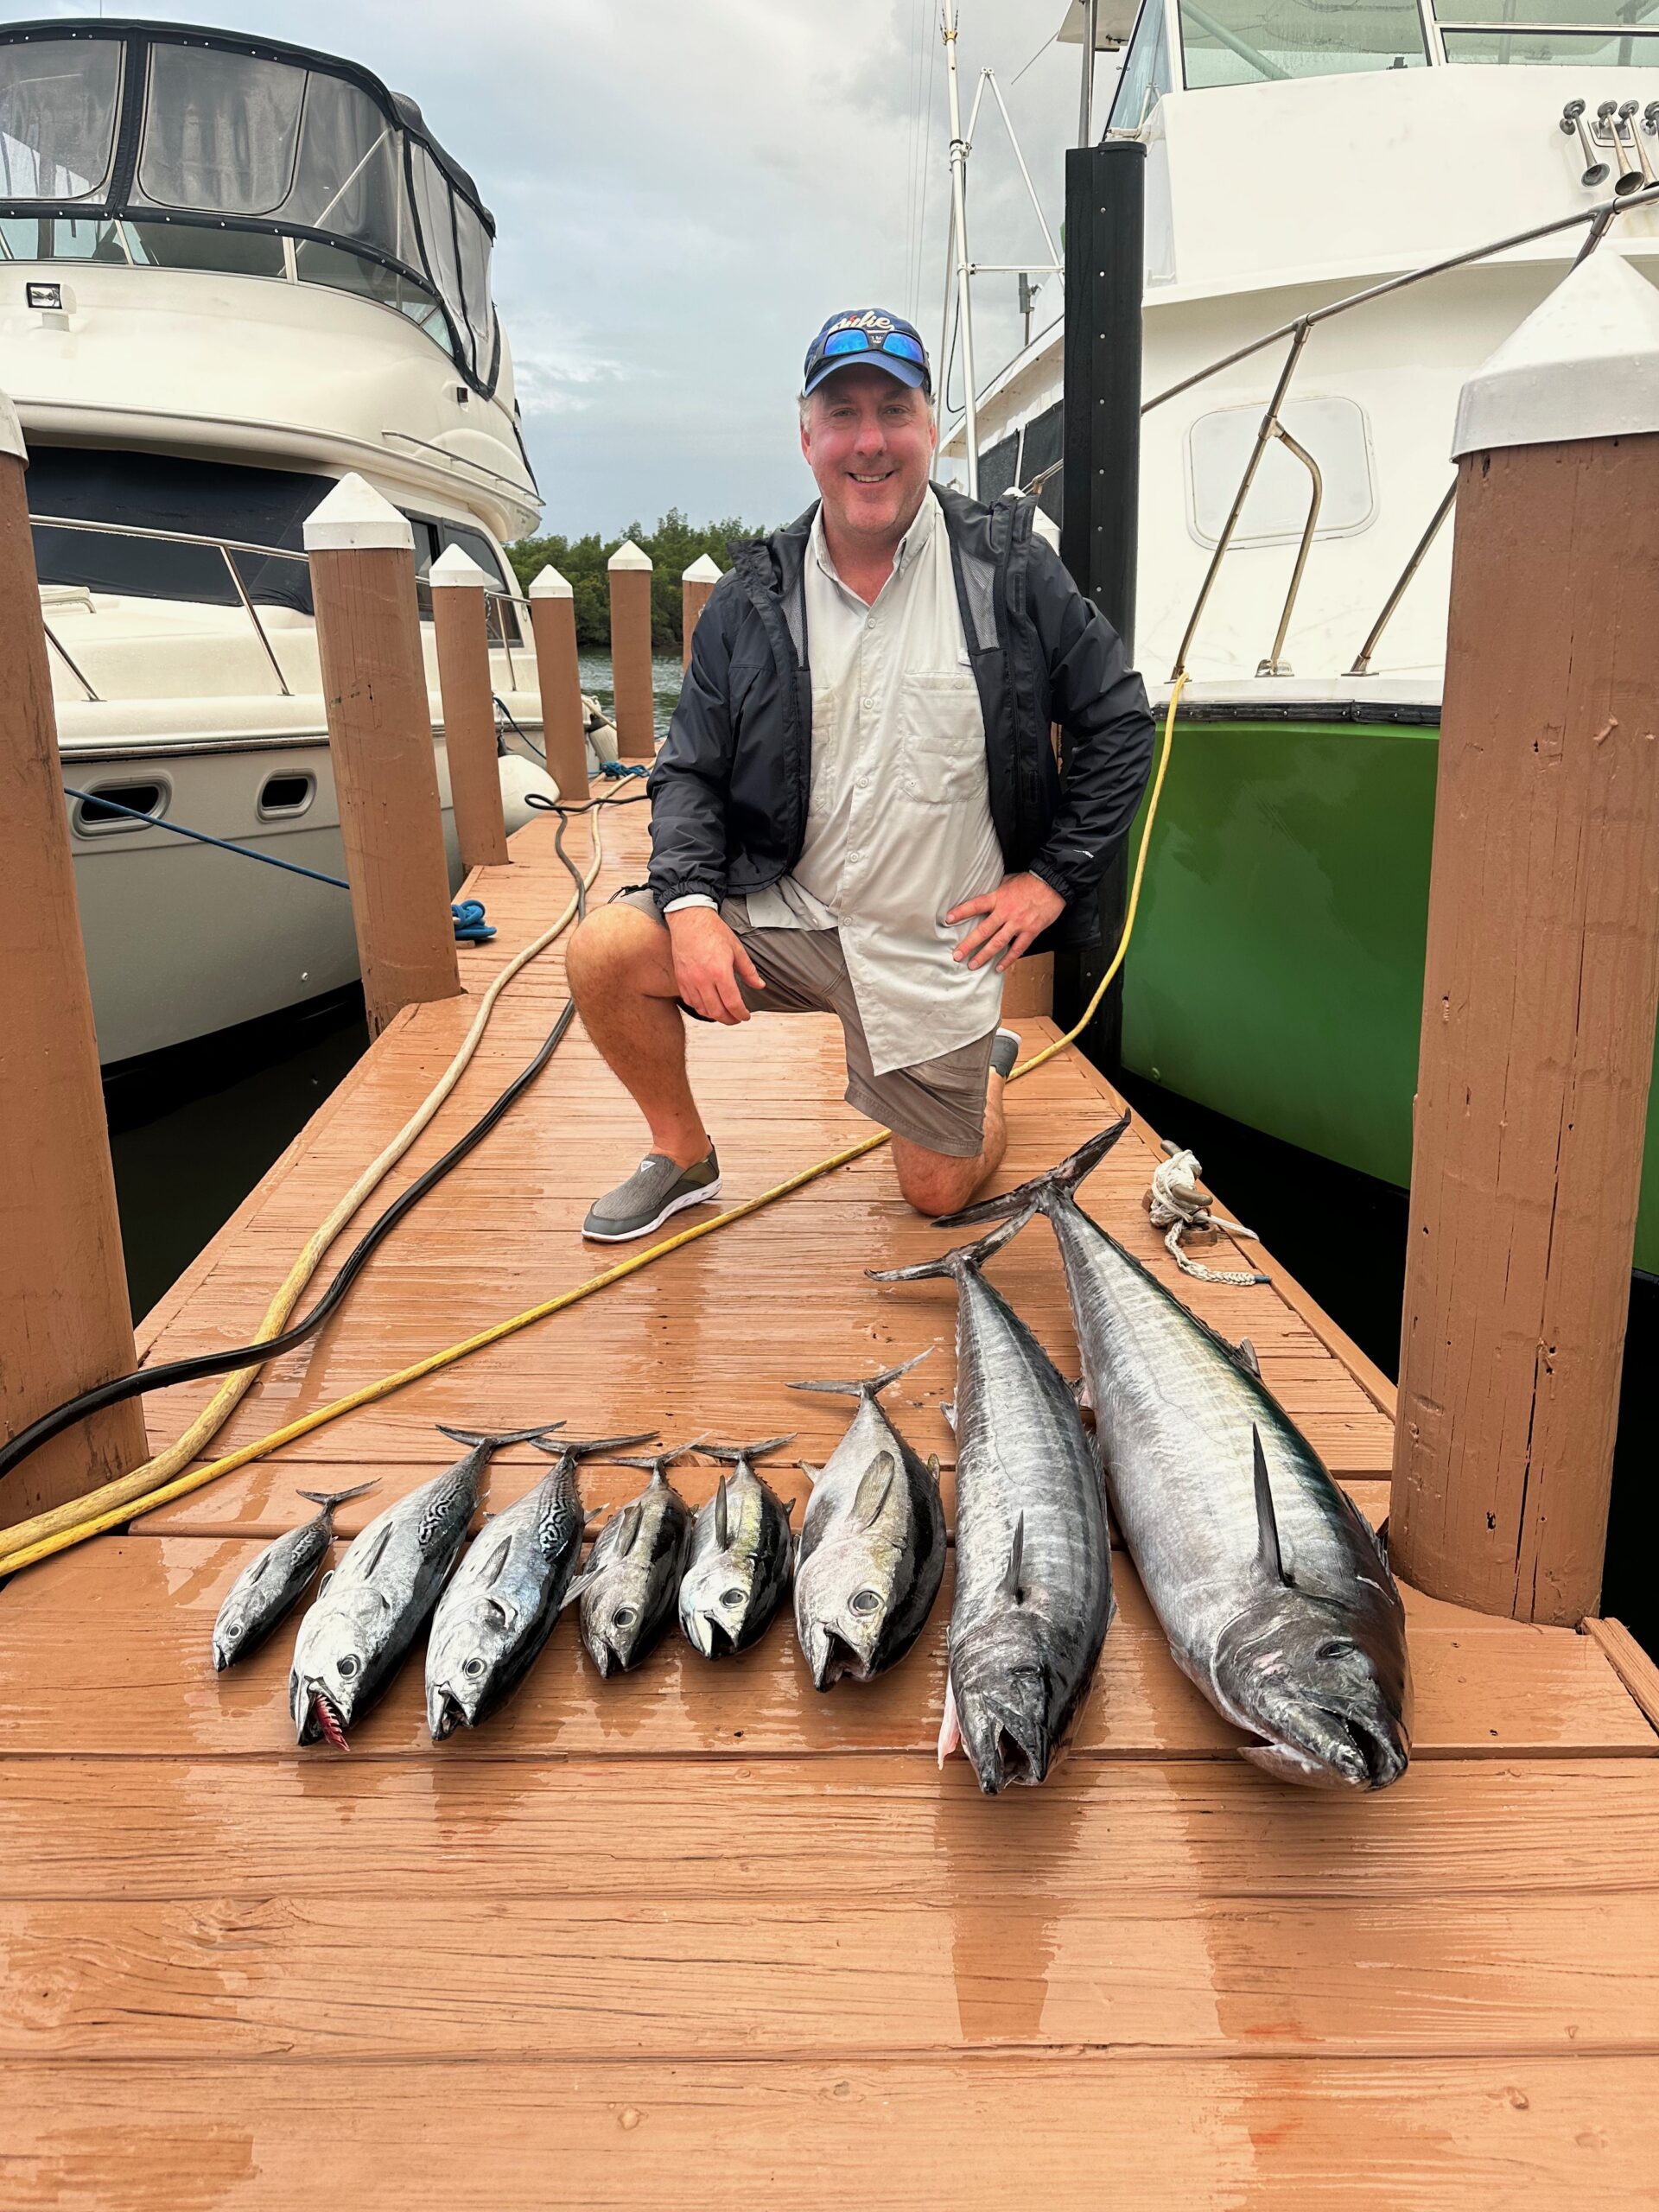 Fort Lauderdale Fishing Charters Hollywood, FL